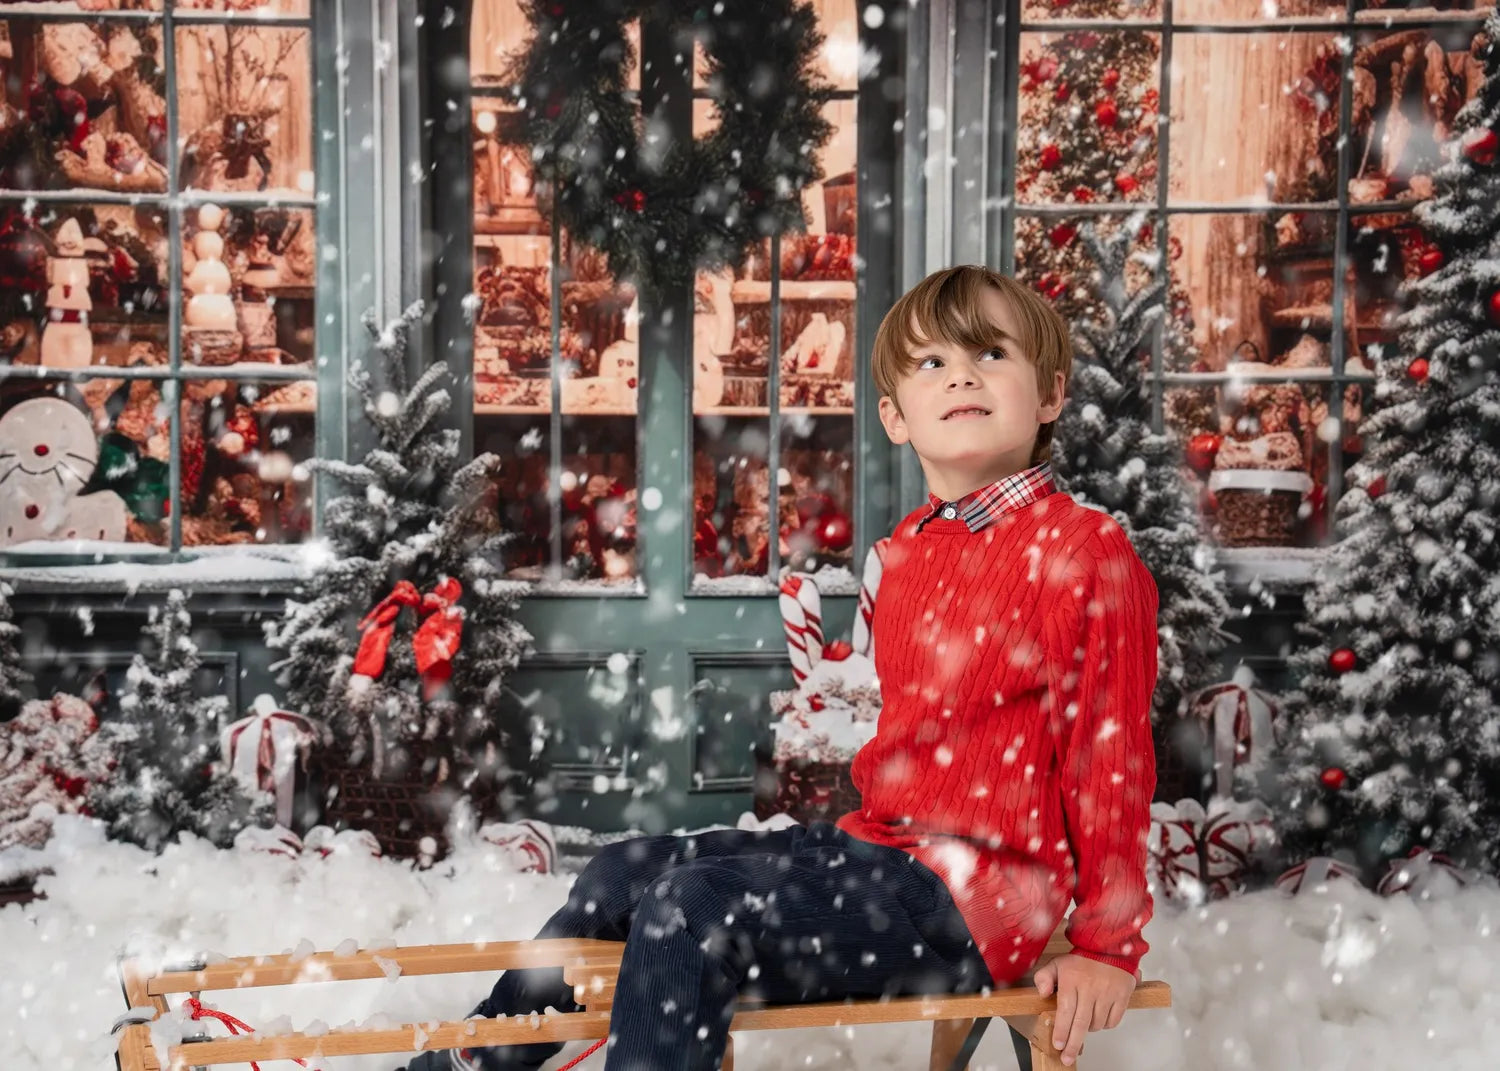 Kate Christmas Gift Store in Snow Backdrop for Photography